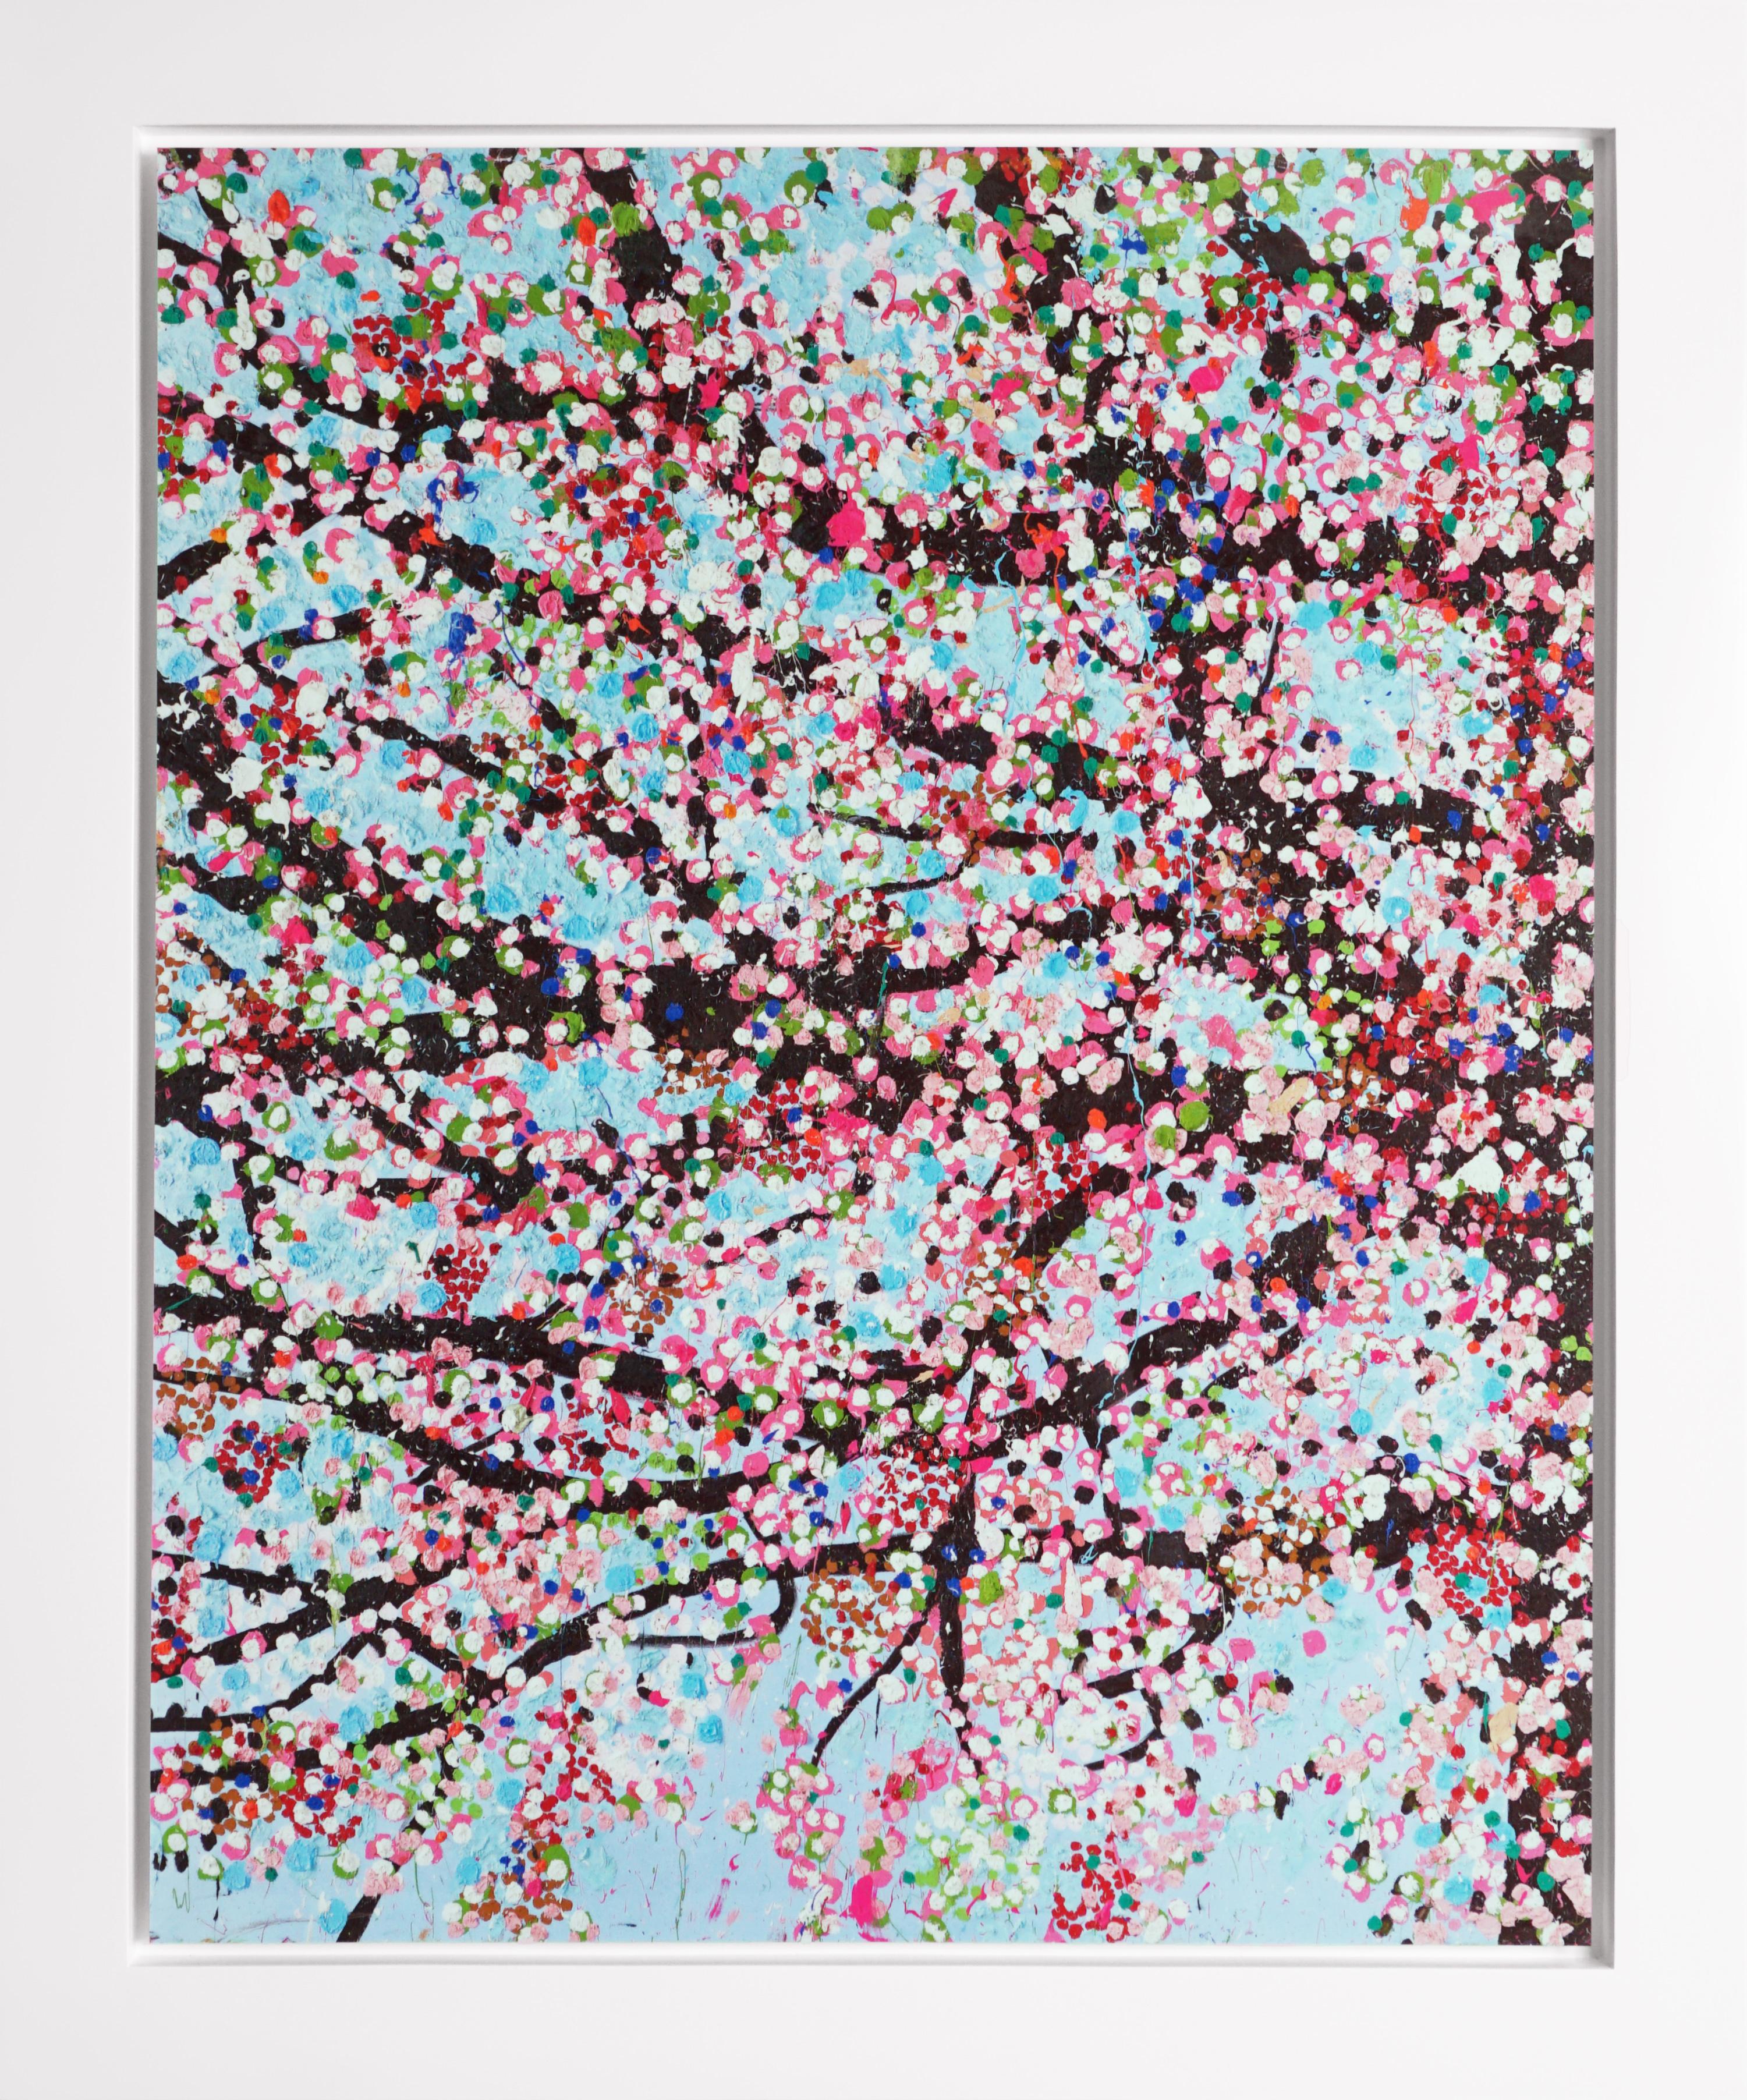 Damien Hirst Abstract Print - The Virtues 'Loyalty', Limited Edition 'Cherry Blossom' Landscape, 2021